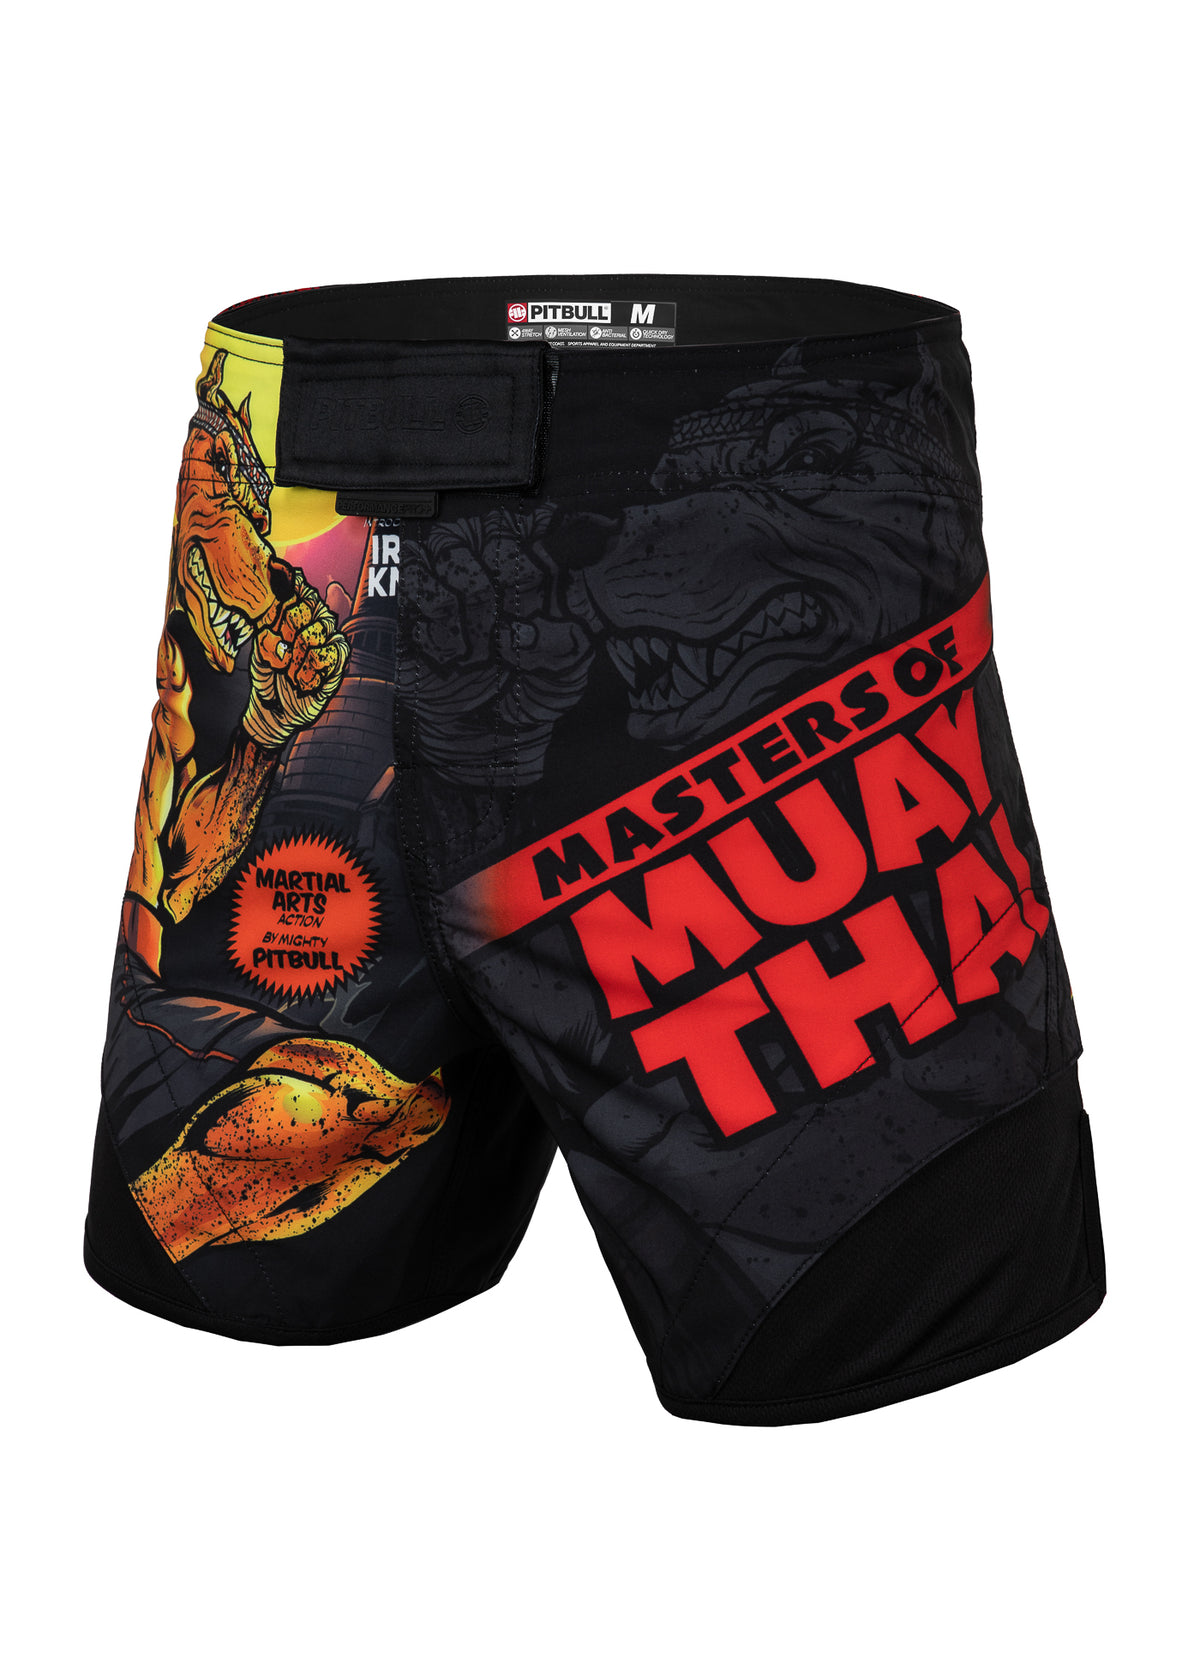 MASTERS OF MUAY THAI HILLTOP Grappling Shorts